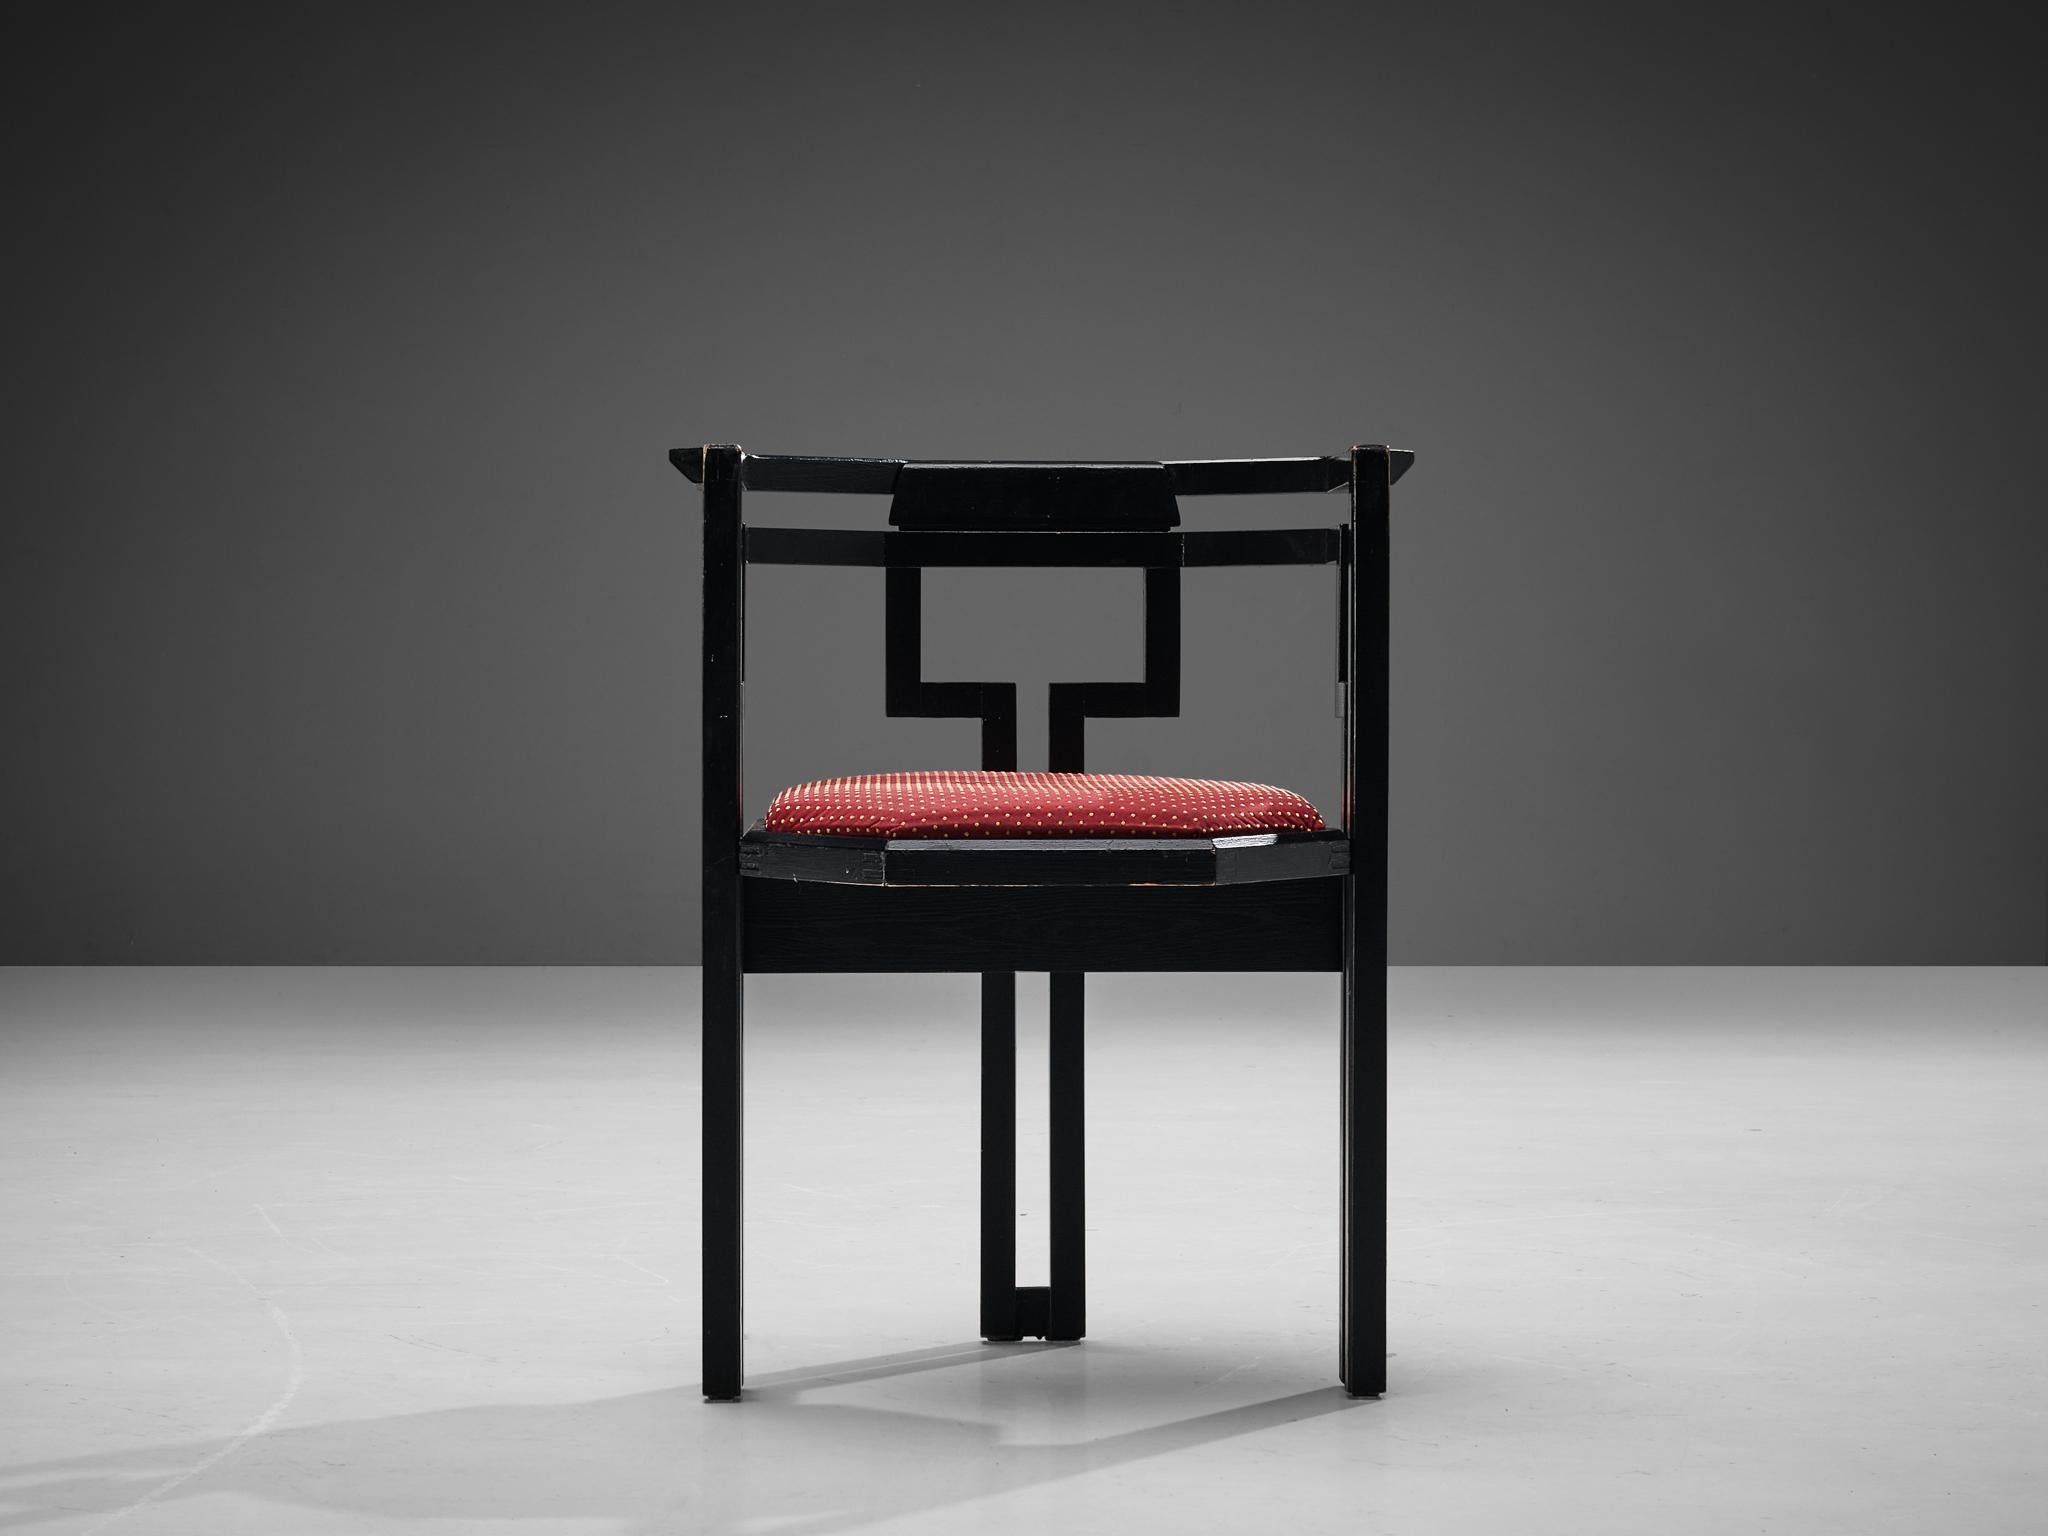 Dining chair, black lacquered oak, white fabric, Italy, 1970s.

Outstanding geometric Italian dining chair. This chair combines a sculptural design that is simple, but very strong in lines and proportions with a luxurious feeling thanks to the